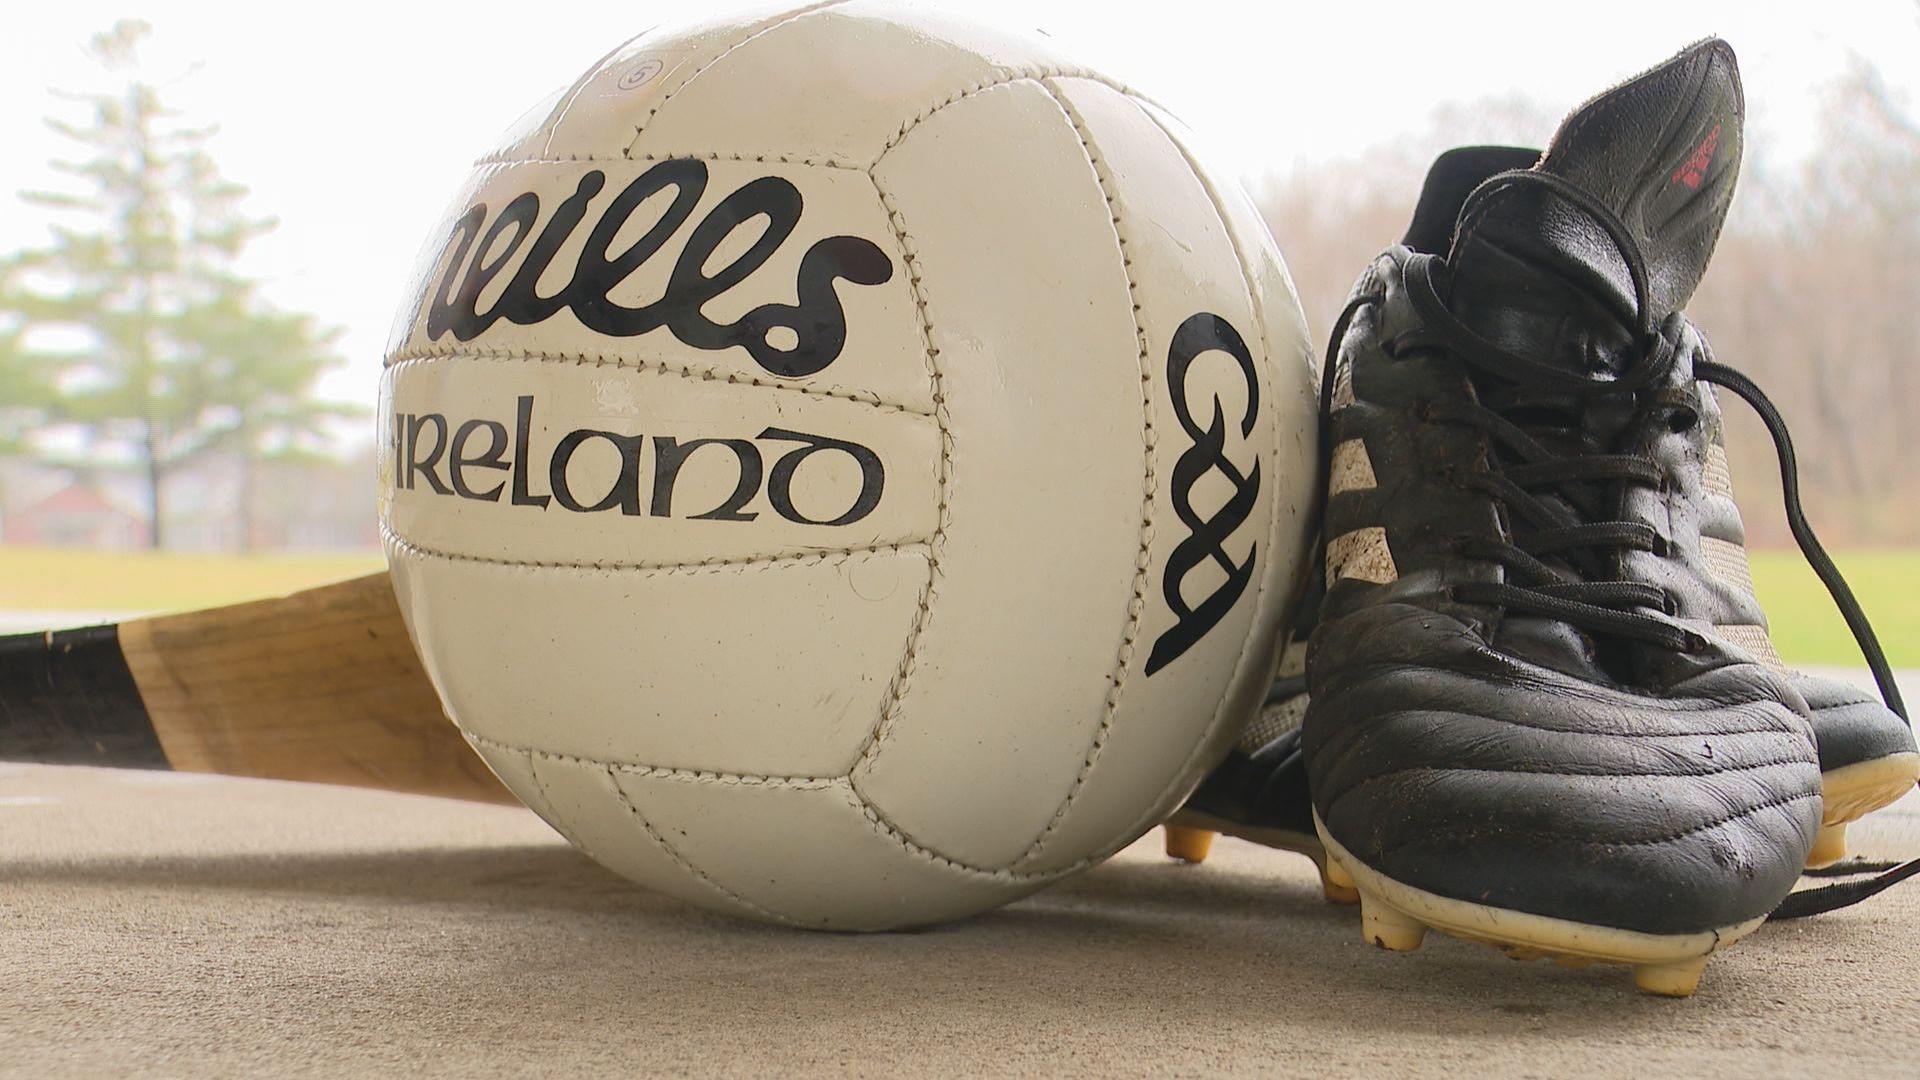 The Indianapolis GAA travels the country playing Gaelic football and hurling — two sports that have similar rules but slightly different equipment.